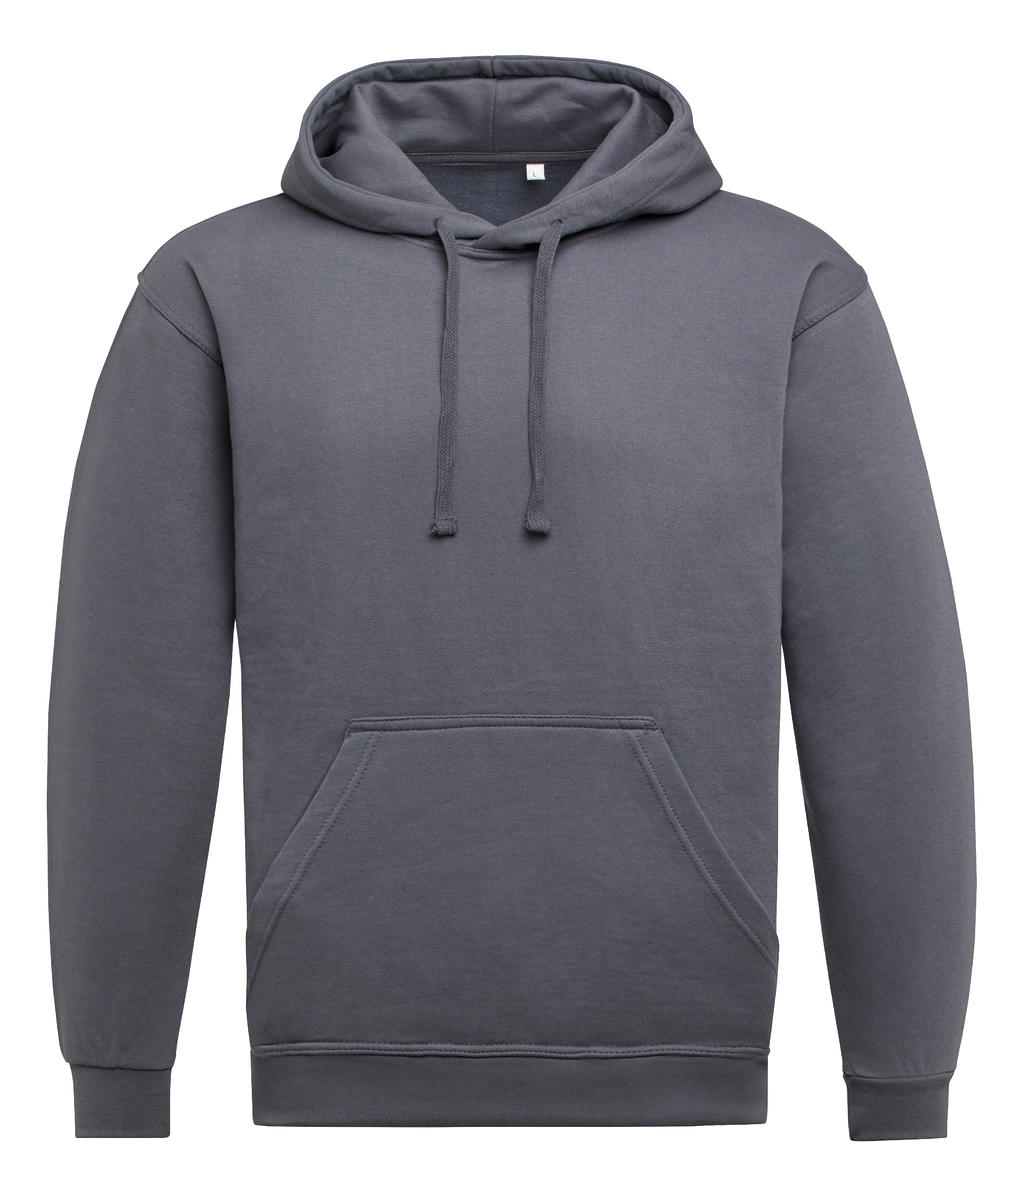  Unisex Hoodie in Farbe Charcoal